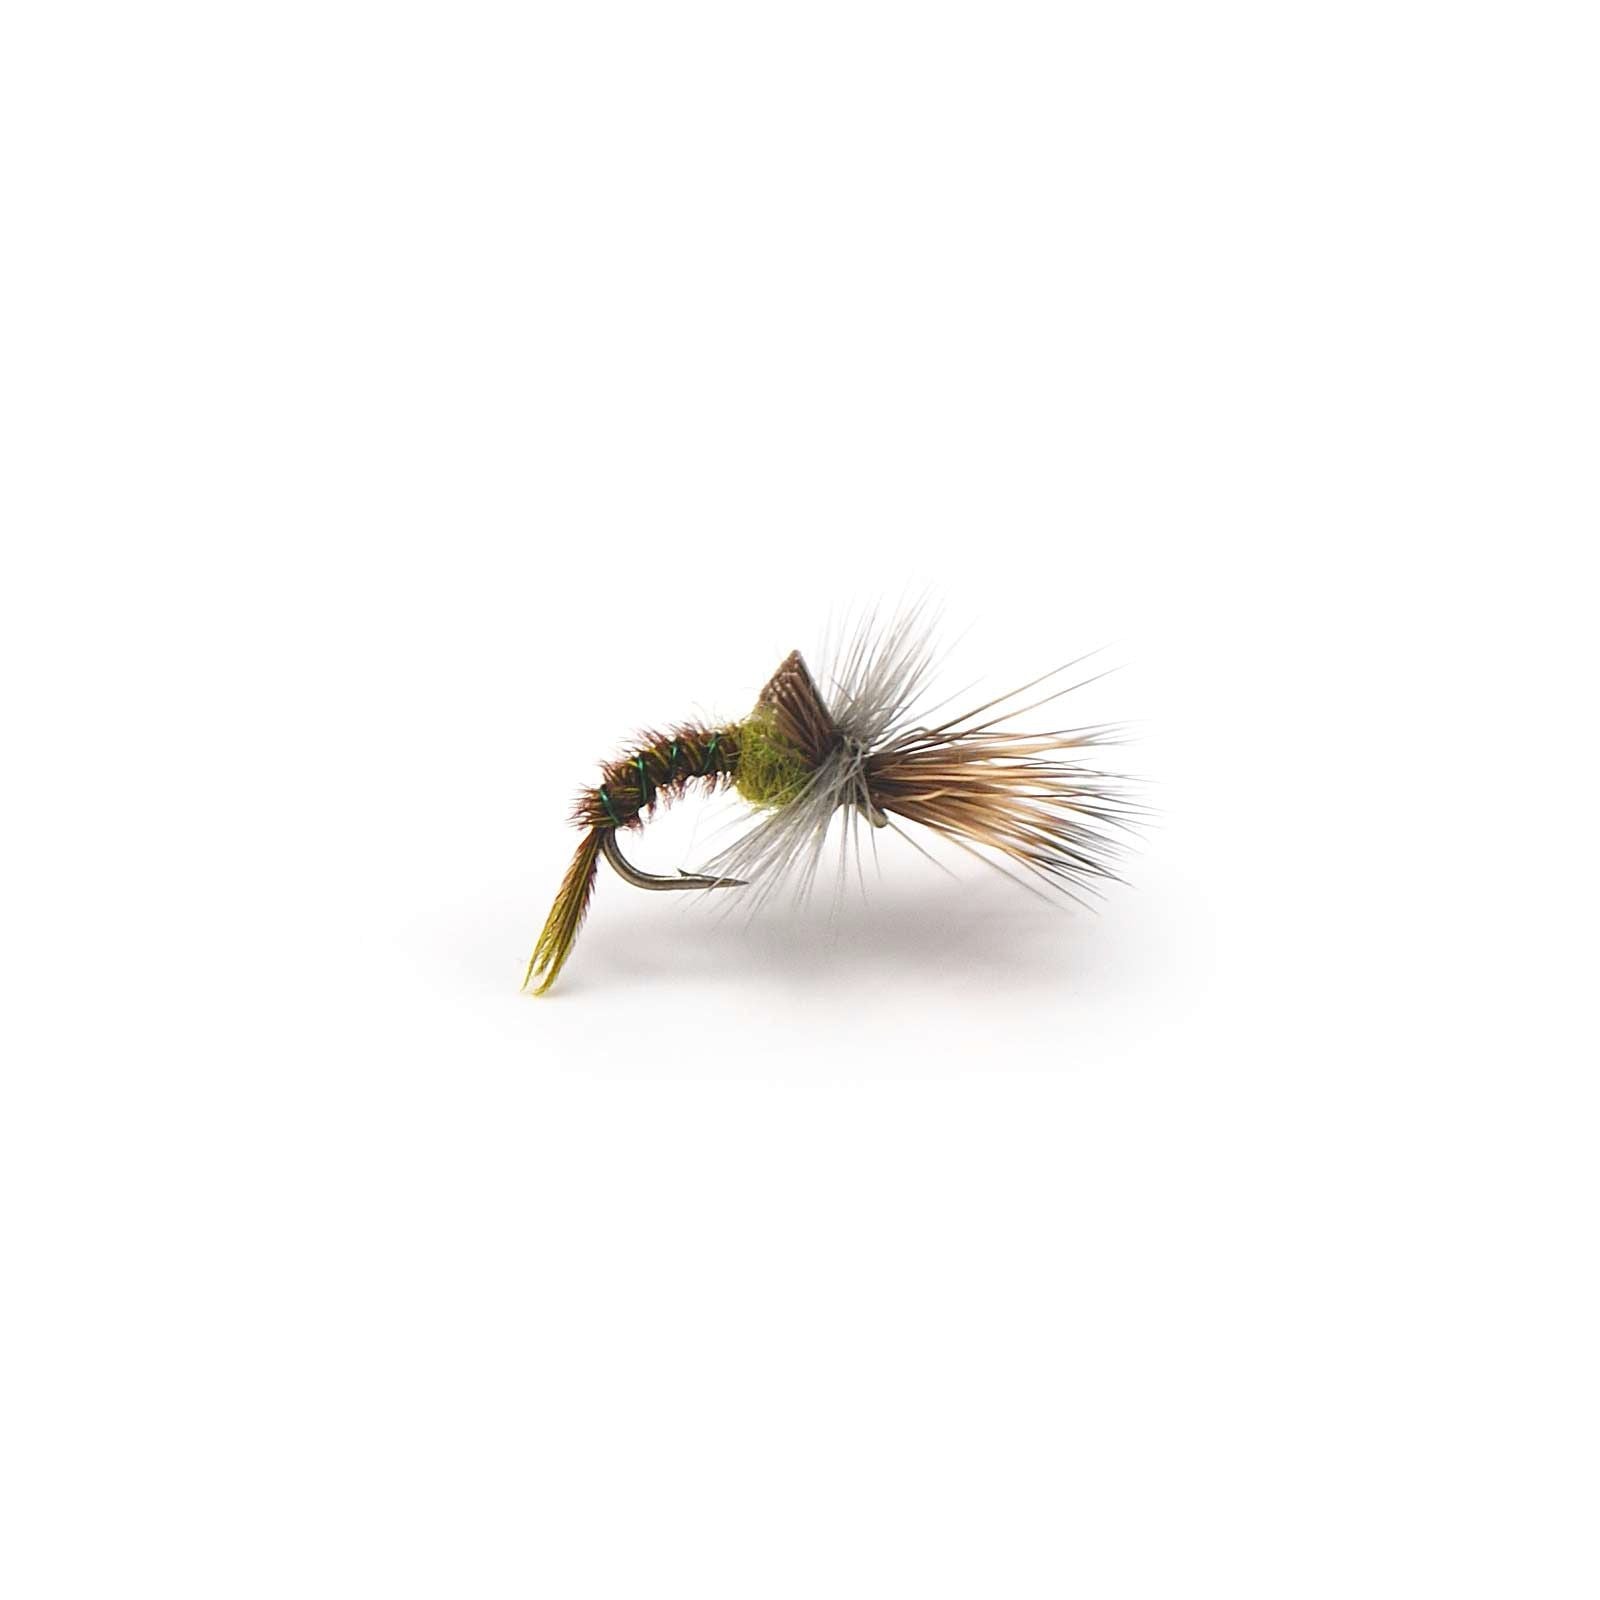 Baetis Challenged  Pacific Fly Fishers